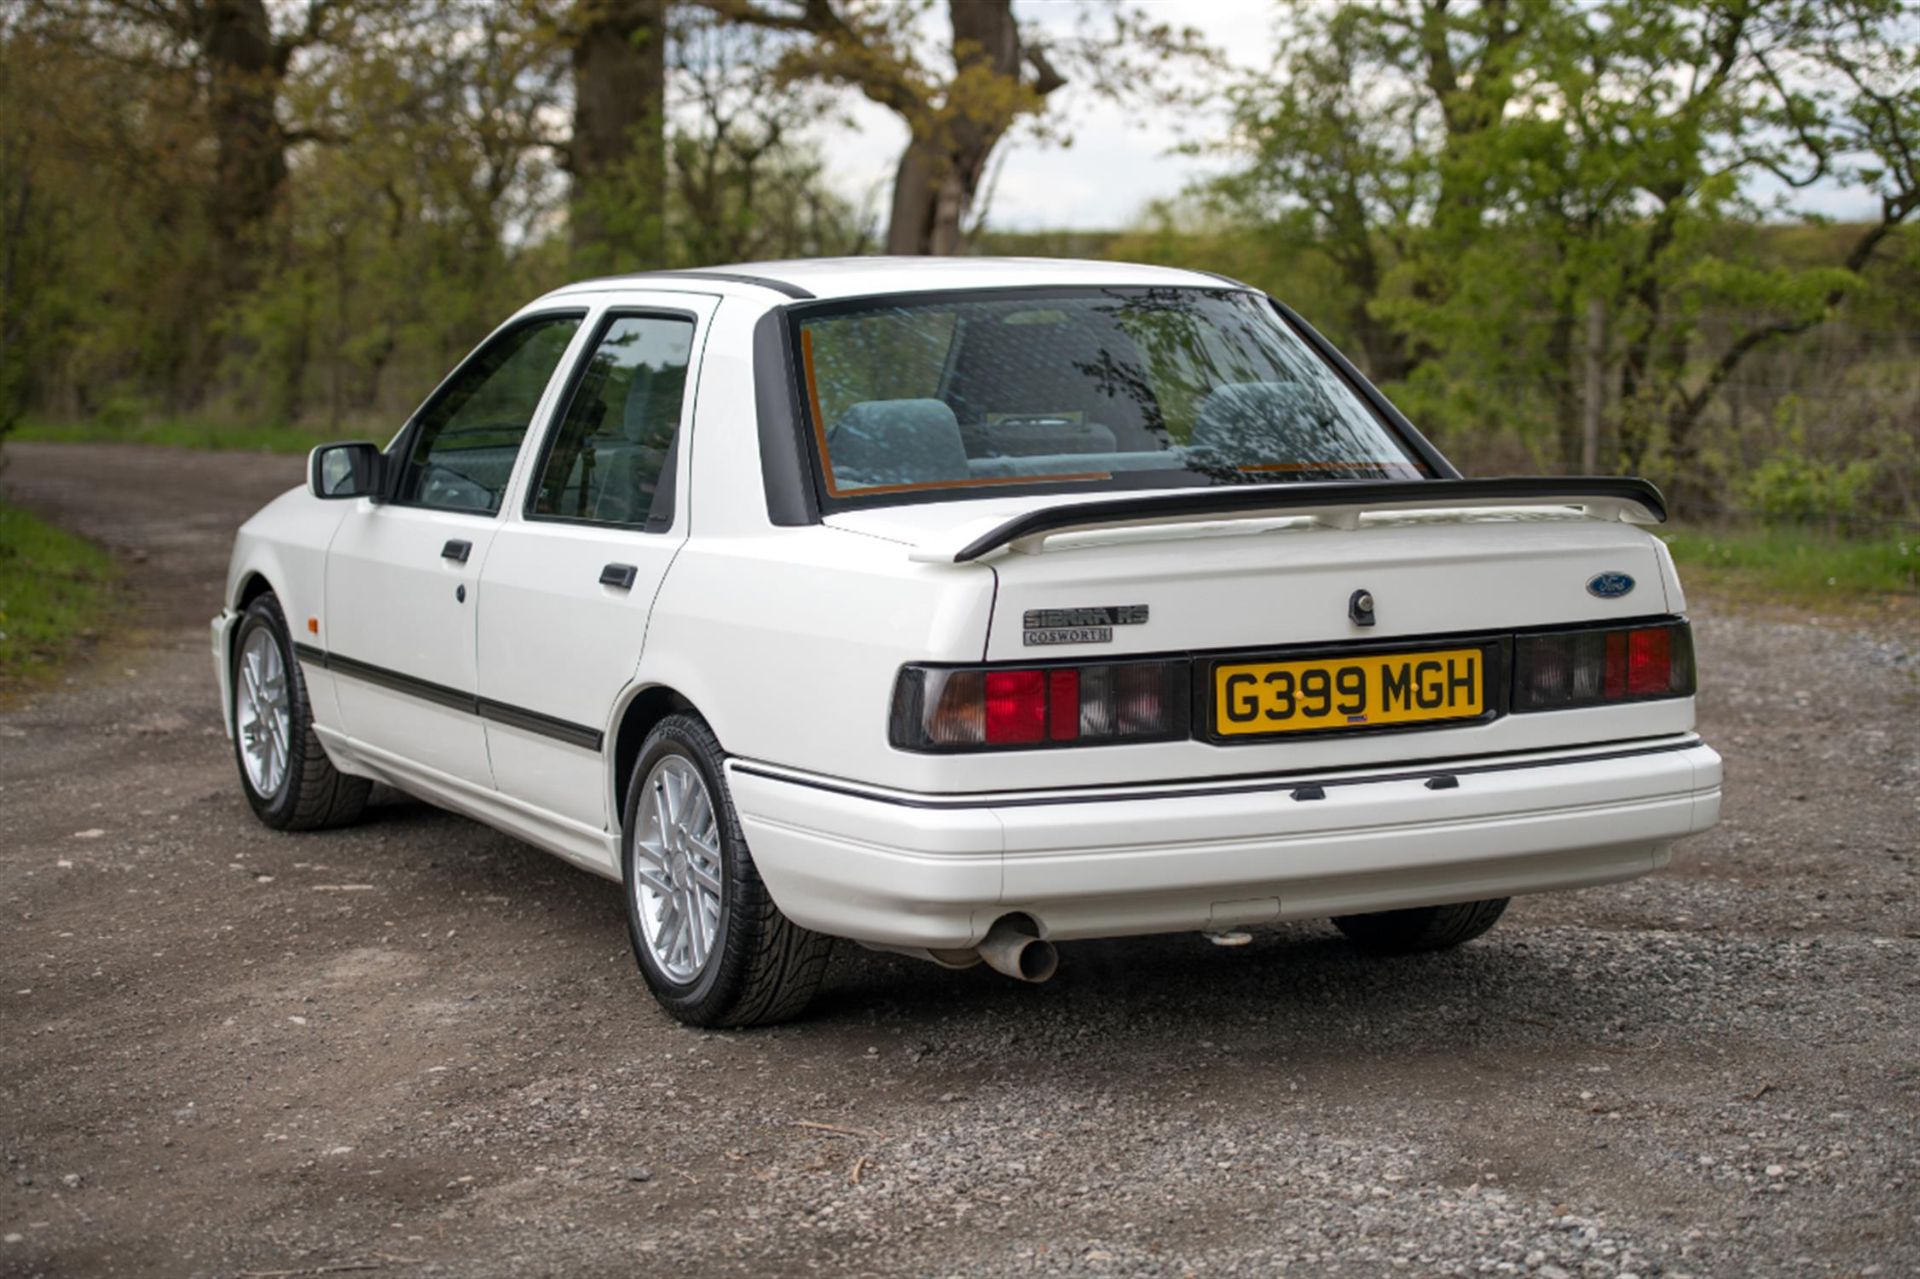 1989 Ford Sierra Sapphire RS Cosworth (2WD) - Image 4 of 10